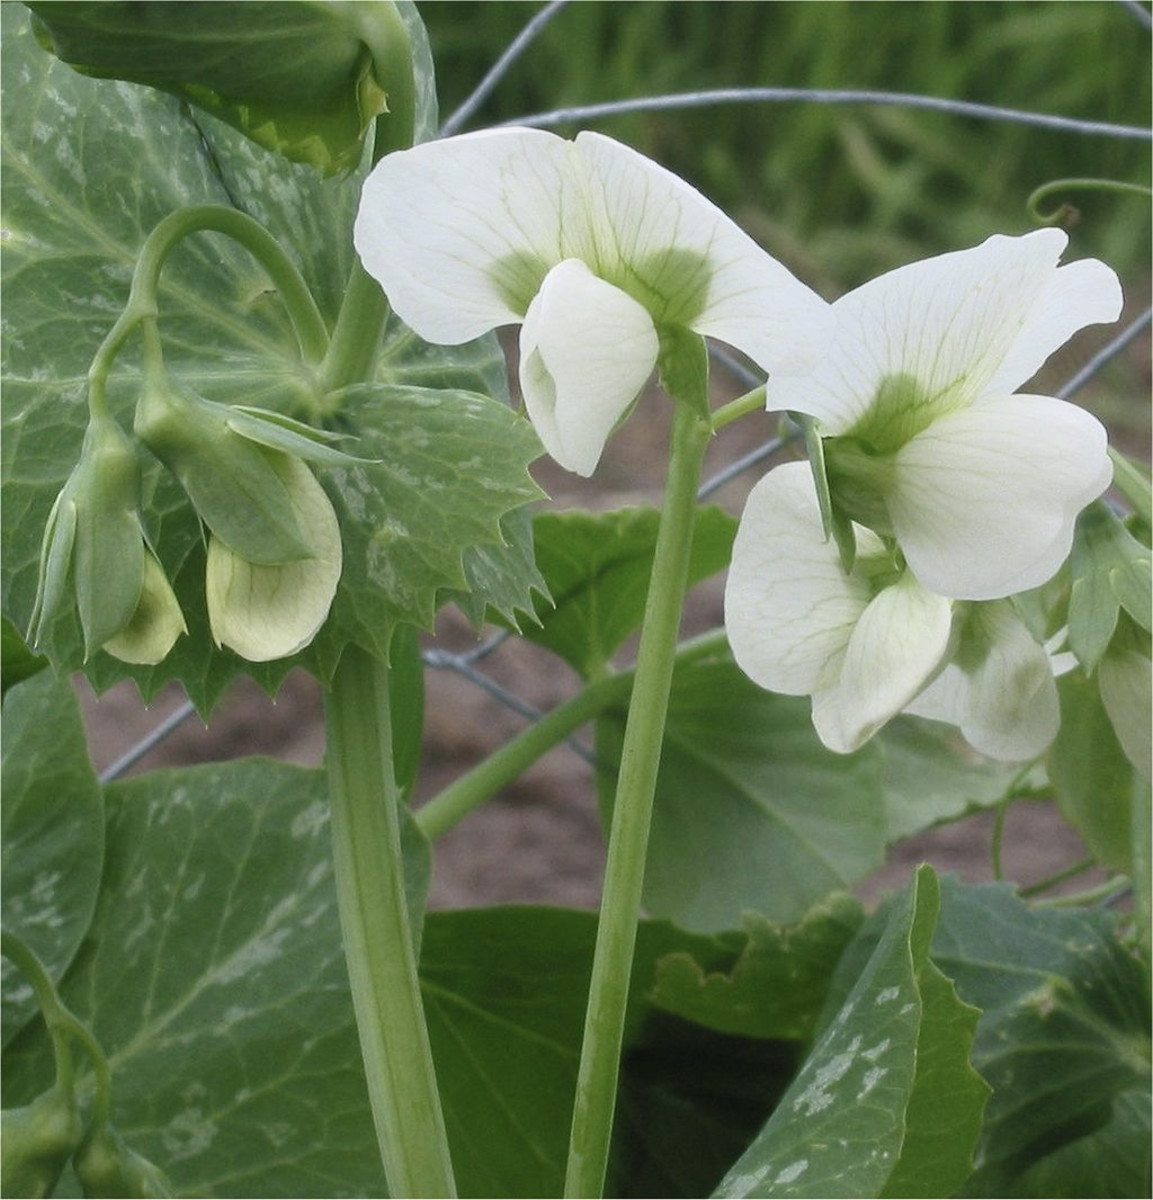 Peas start producing pods that ripen quickly soon after they bloom. The flowers of most varieties are white, but some can be pink, red, or even purple and white.